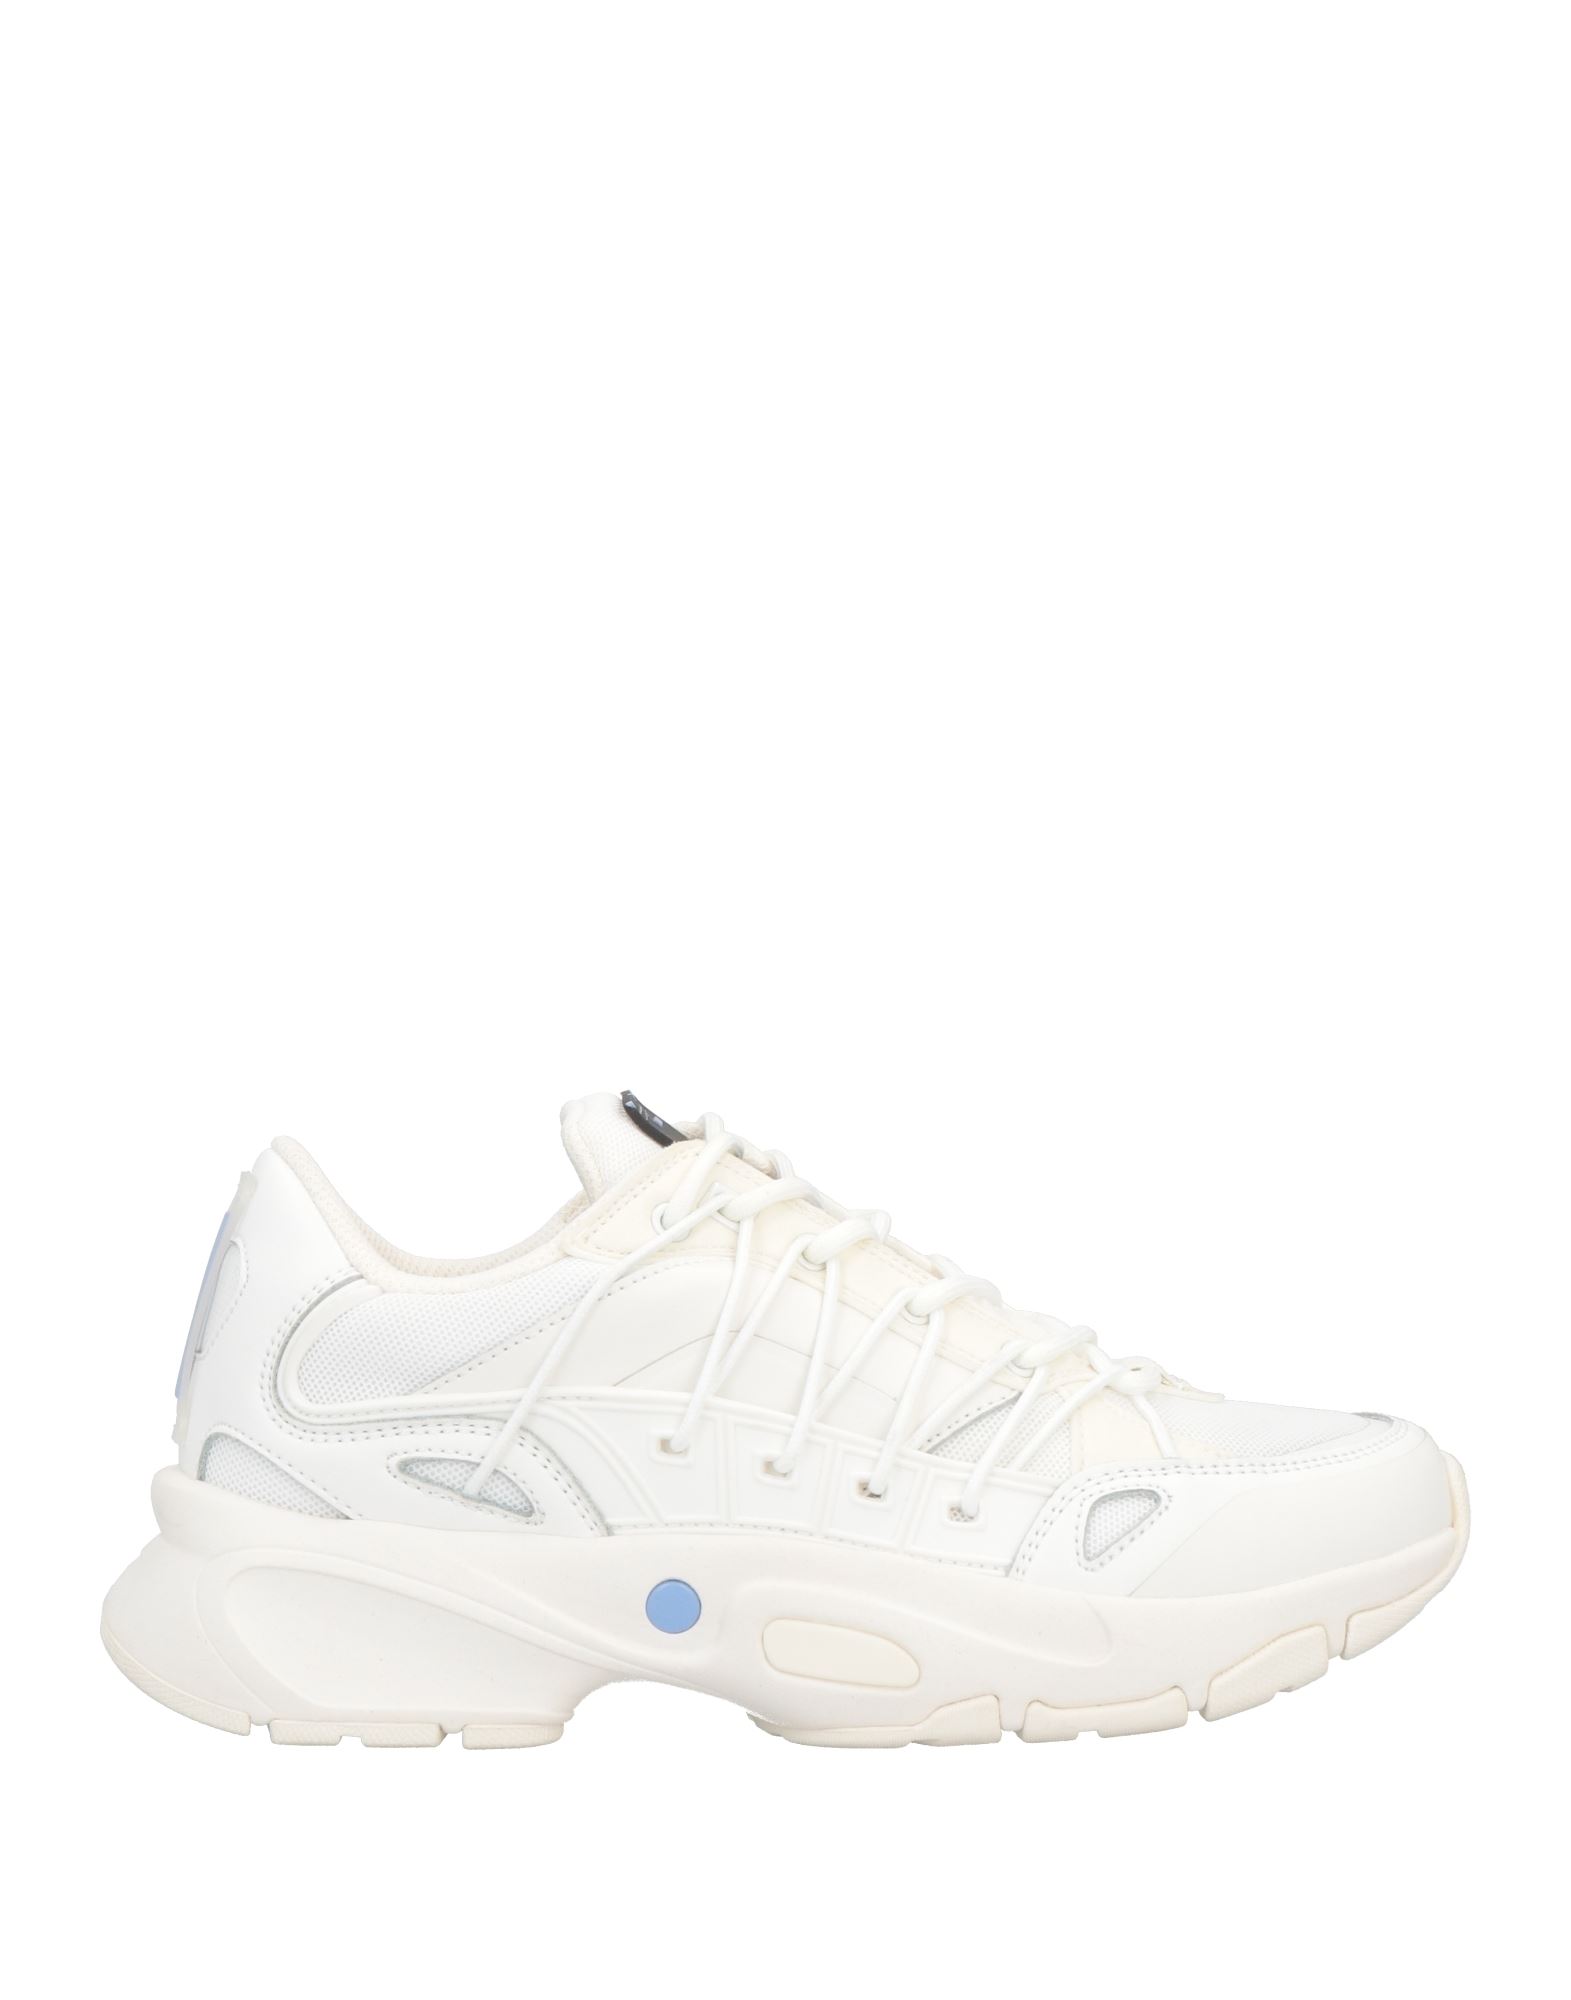 MCQ BY ALEXANDER MCQUEEN MCQ ALEXANDER MCQUEEN WOMAN SNEAKERS WHITE SIZE 7 TEXTILE FIBERS, SOFT LEATHER